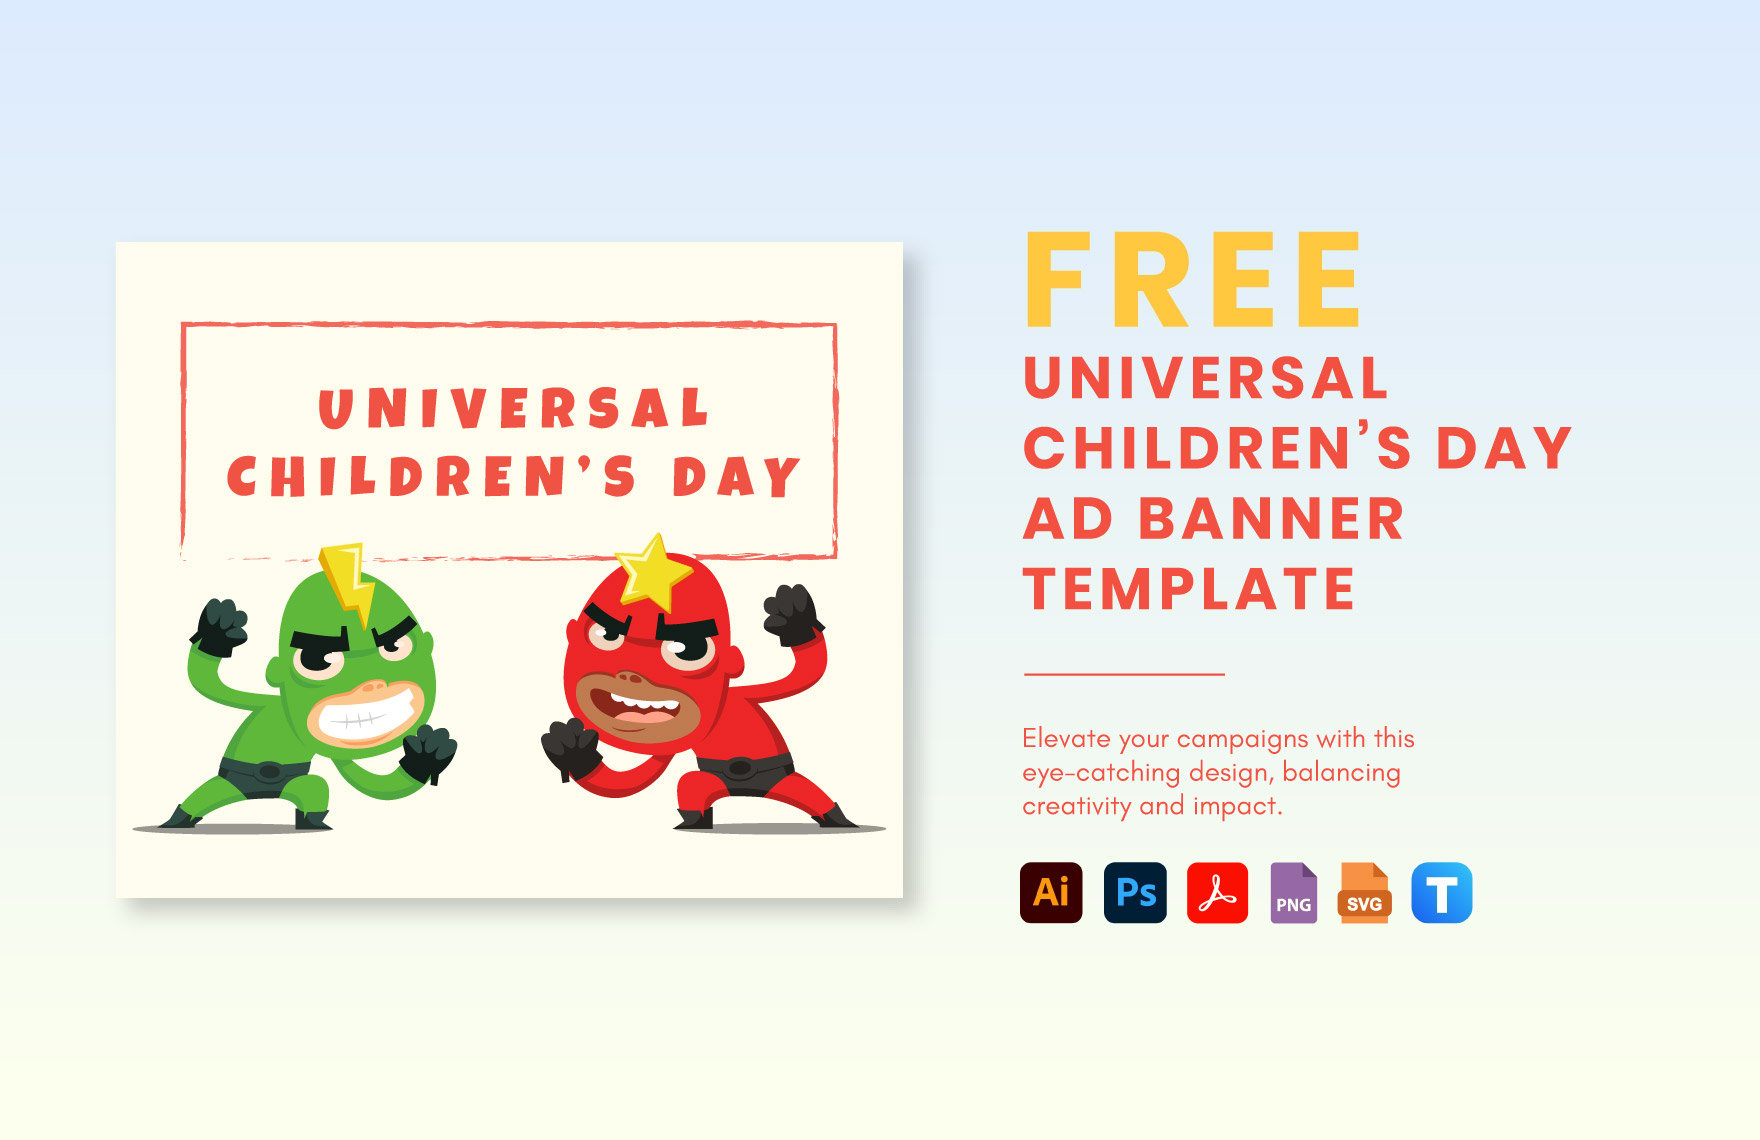 Free Universal Children’s Day Ad Banner Template